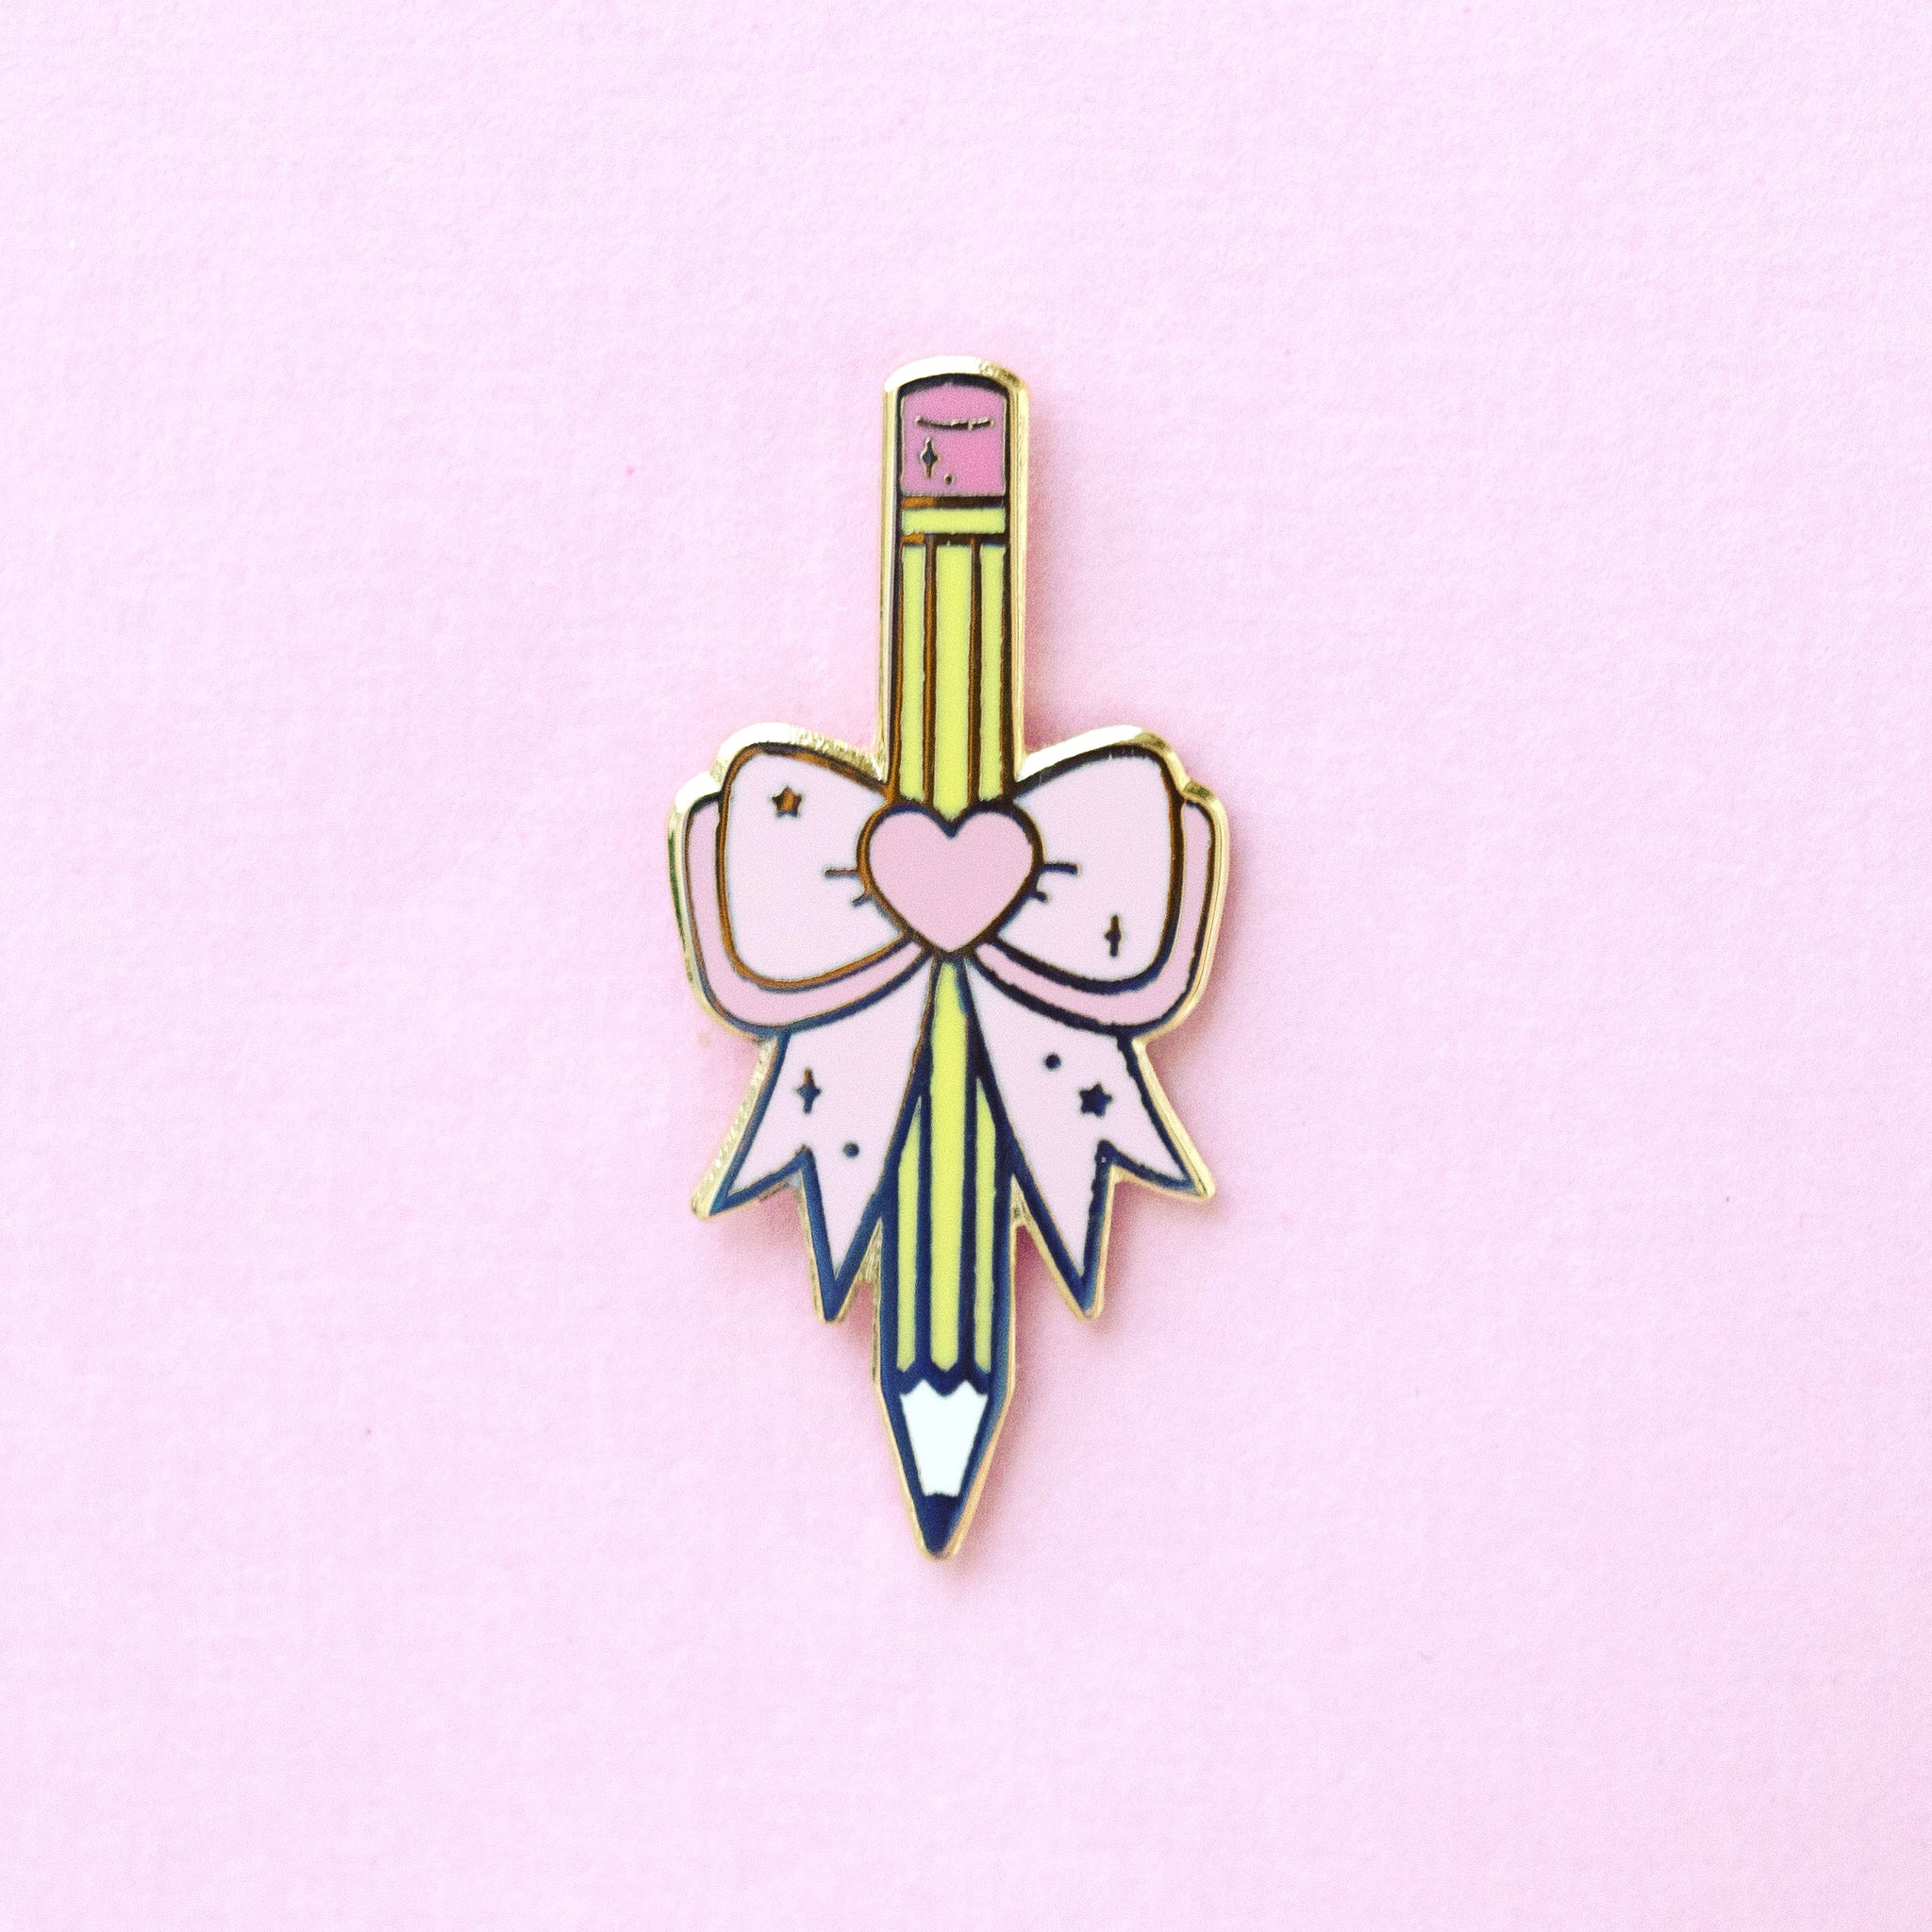 Pencil with Bow Pin - Pink